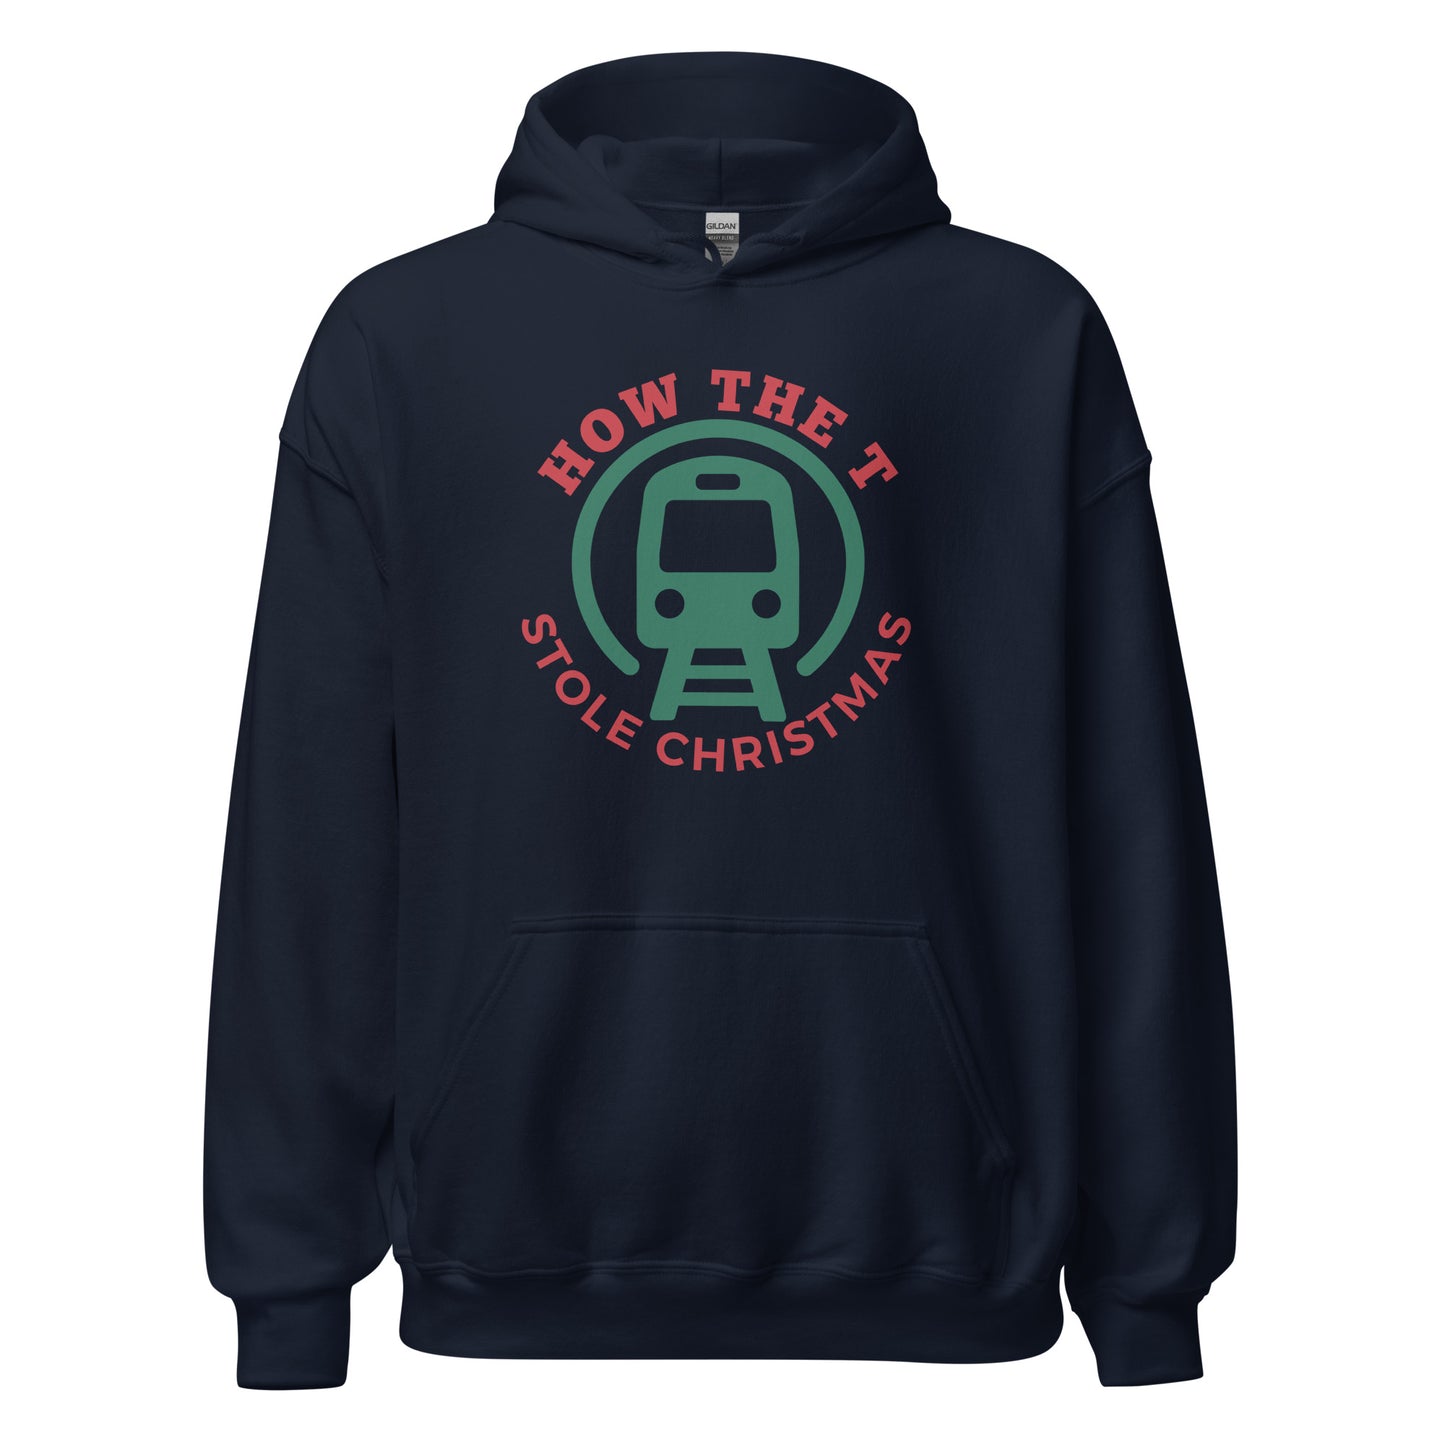 How the T Stole Christmas Hoodie